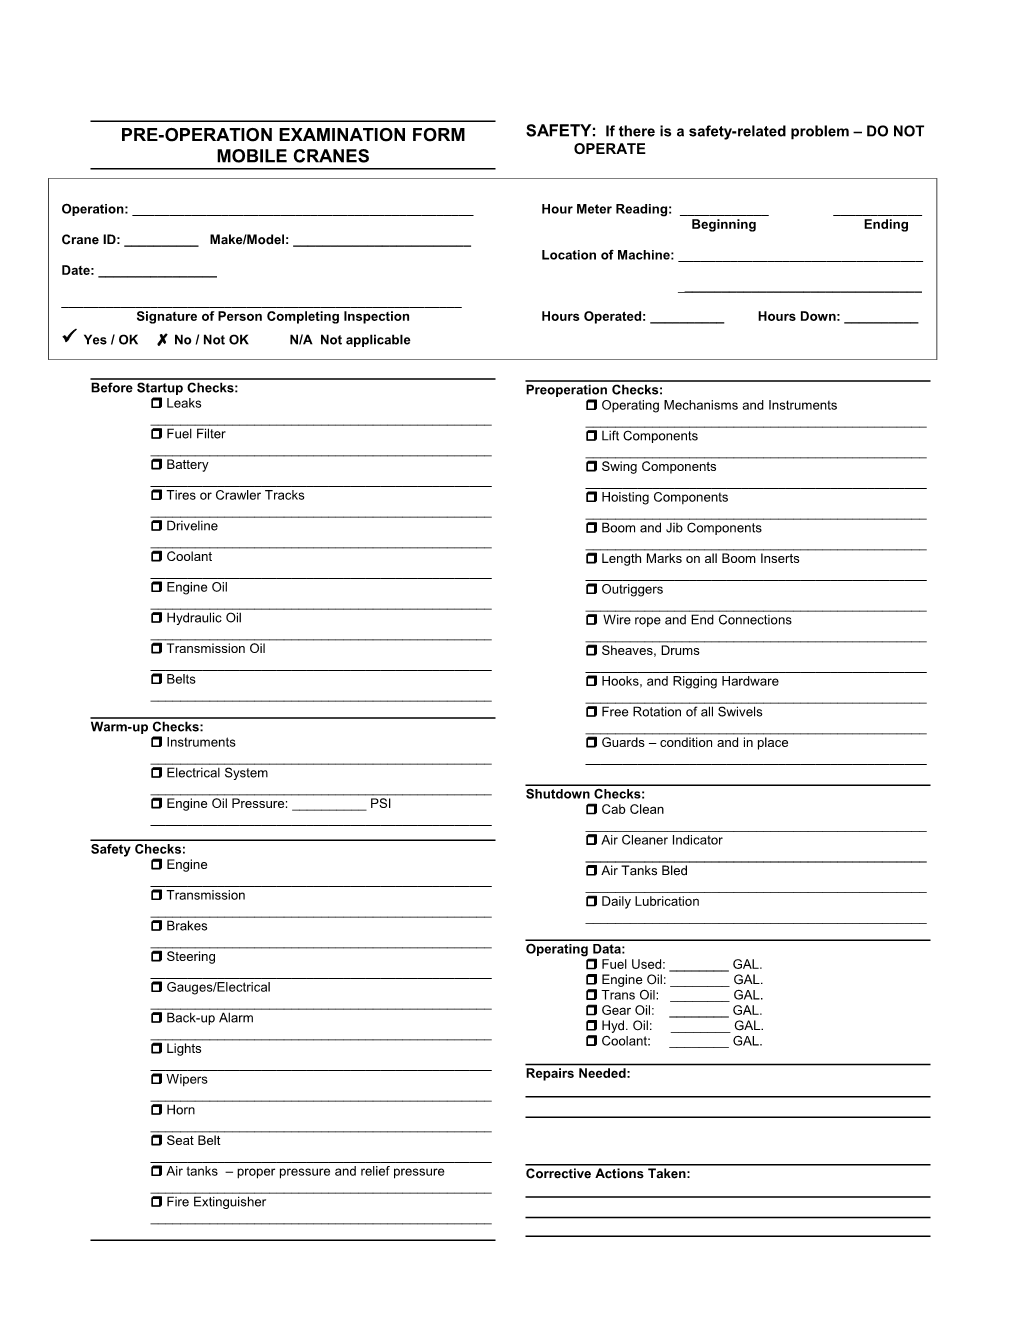 Area Work Place Examination Form